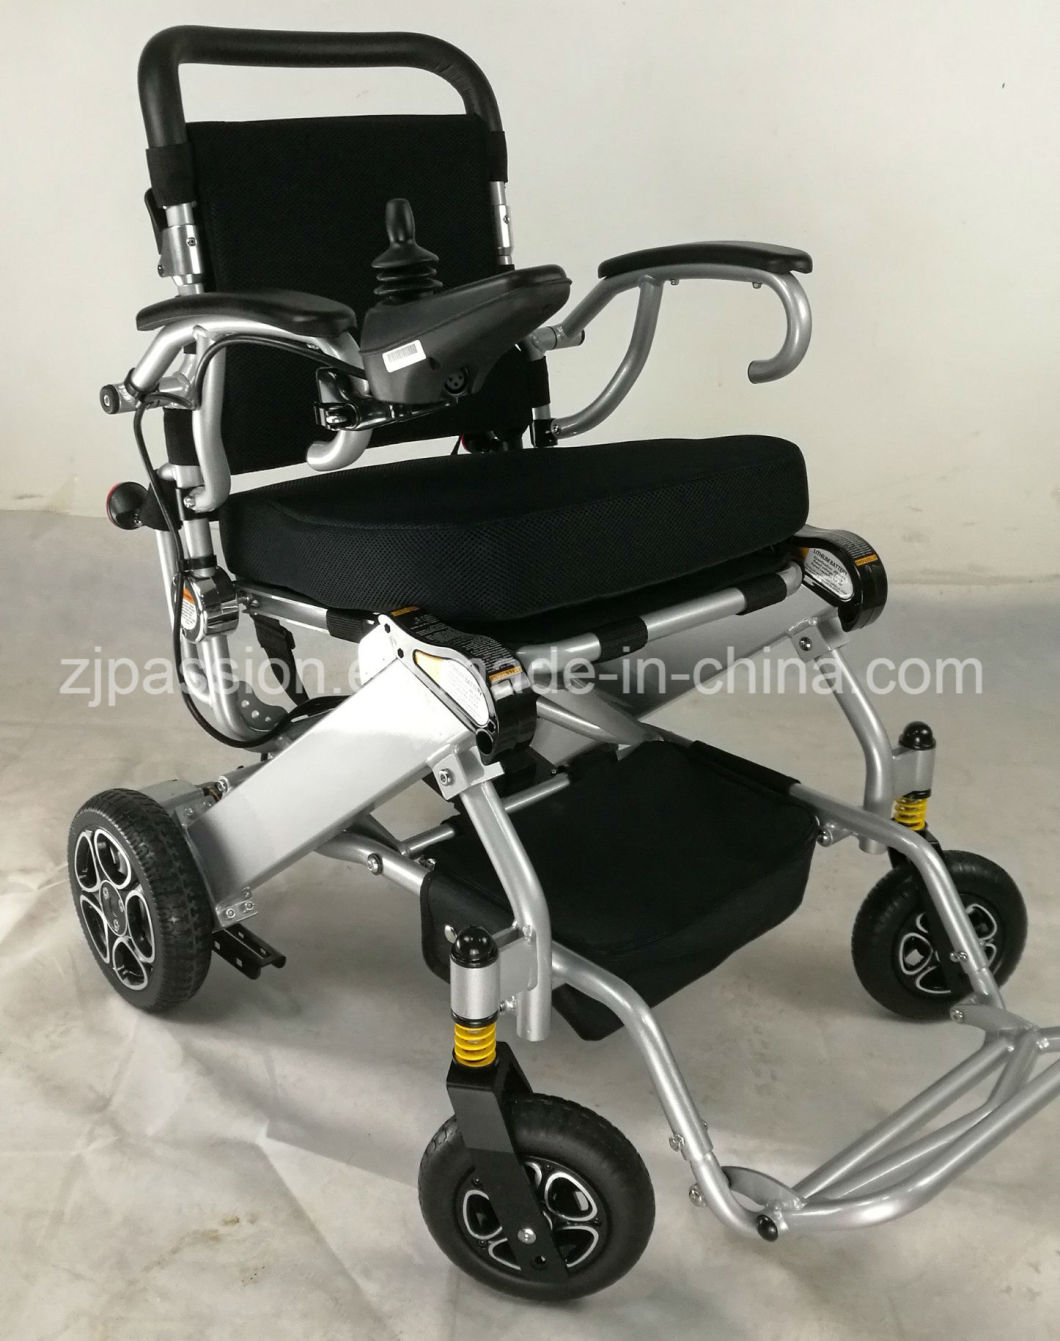 Durable Aluminium Frame Battery Powered Electric Handicapped Wheel Chair